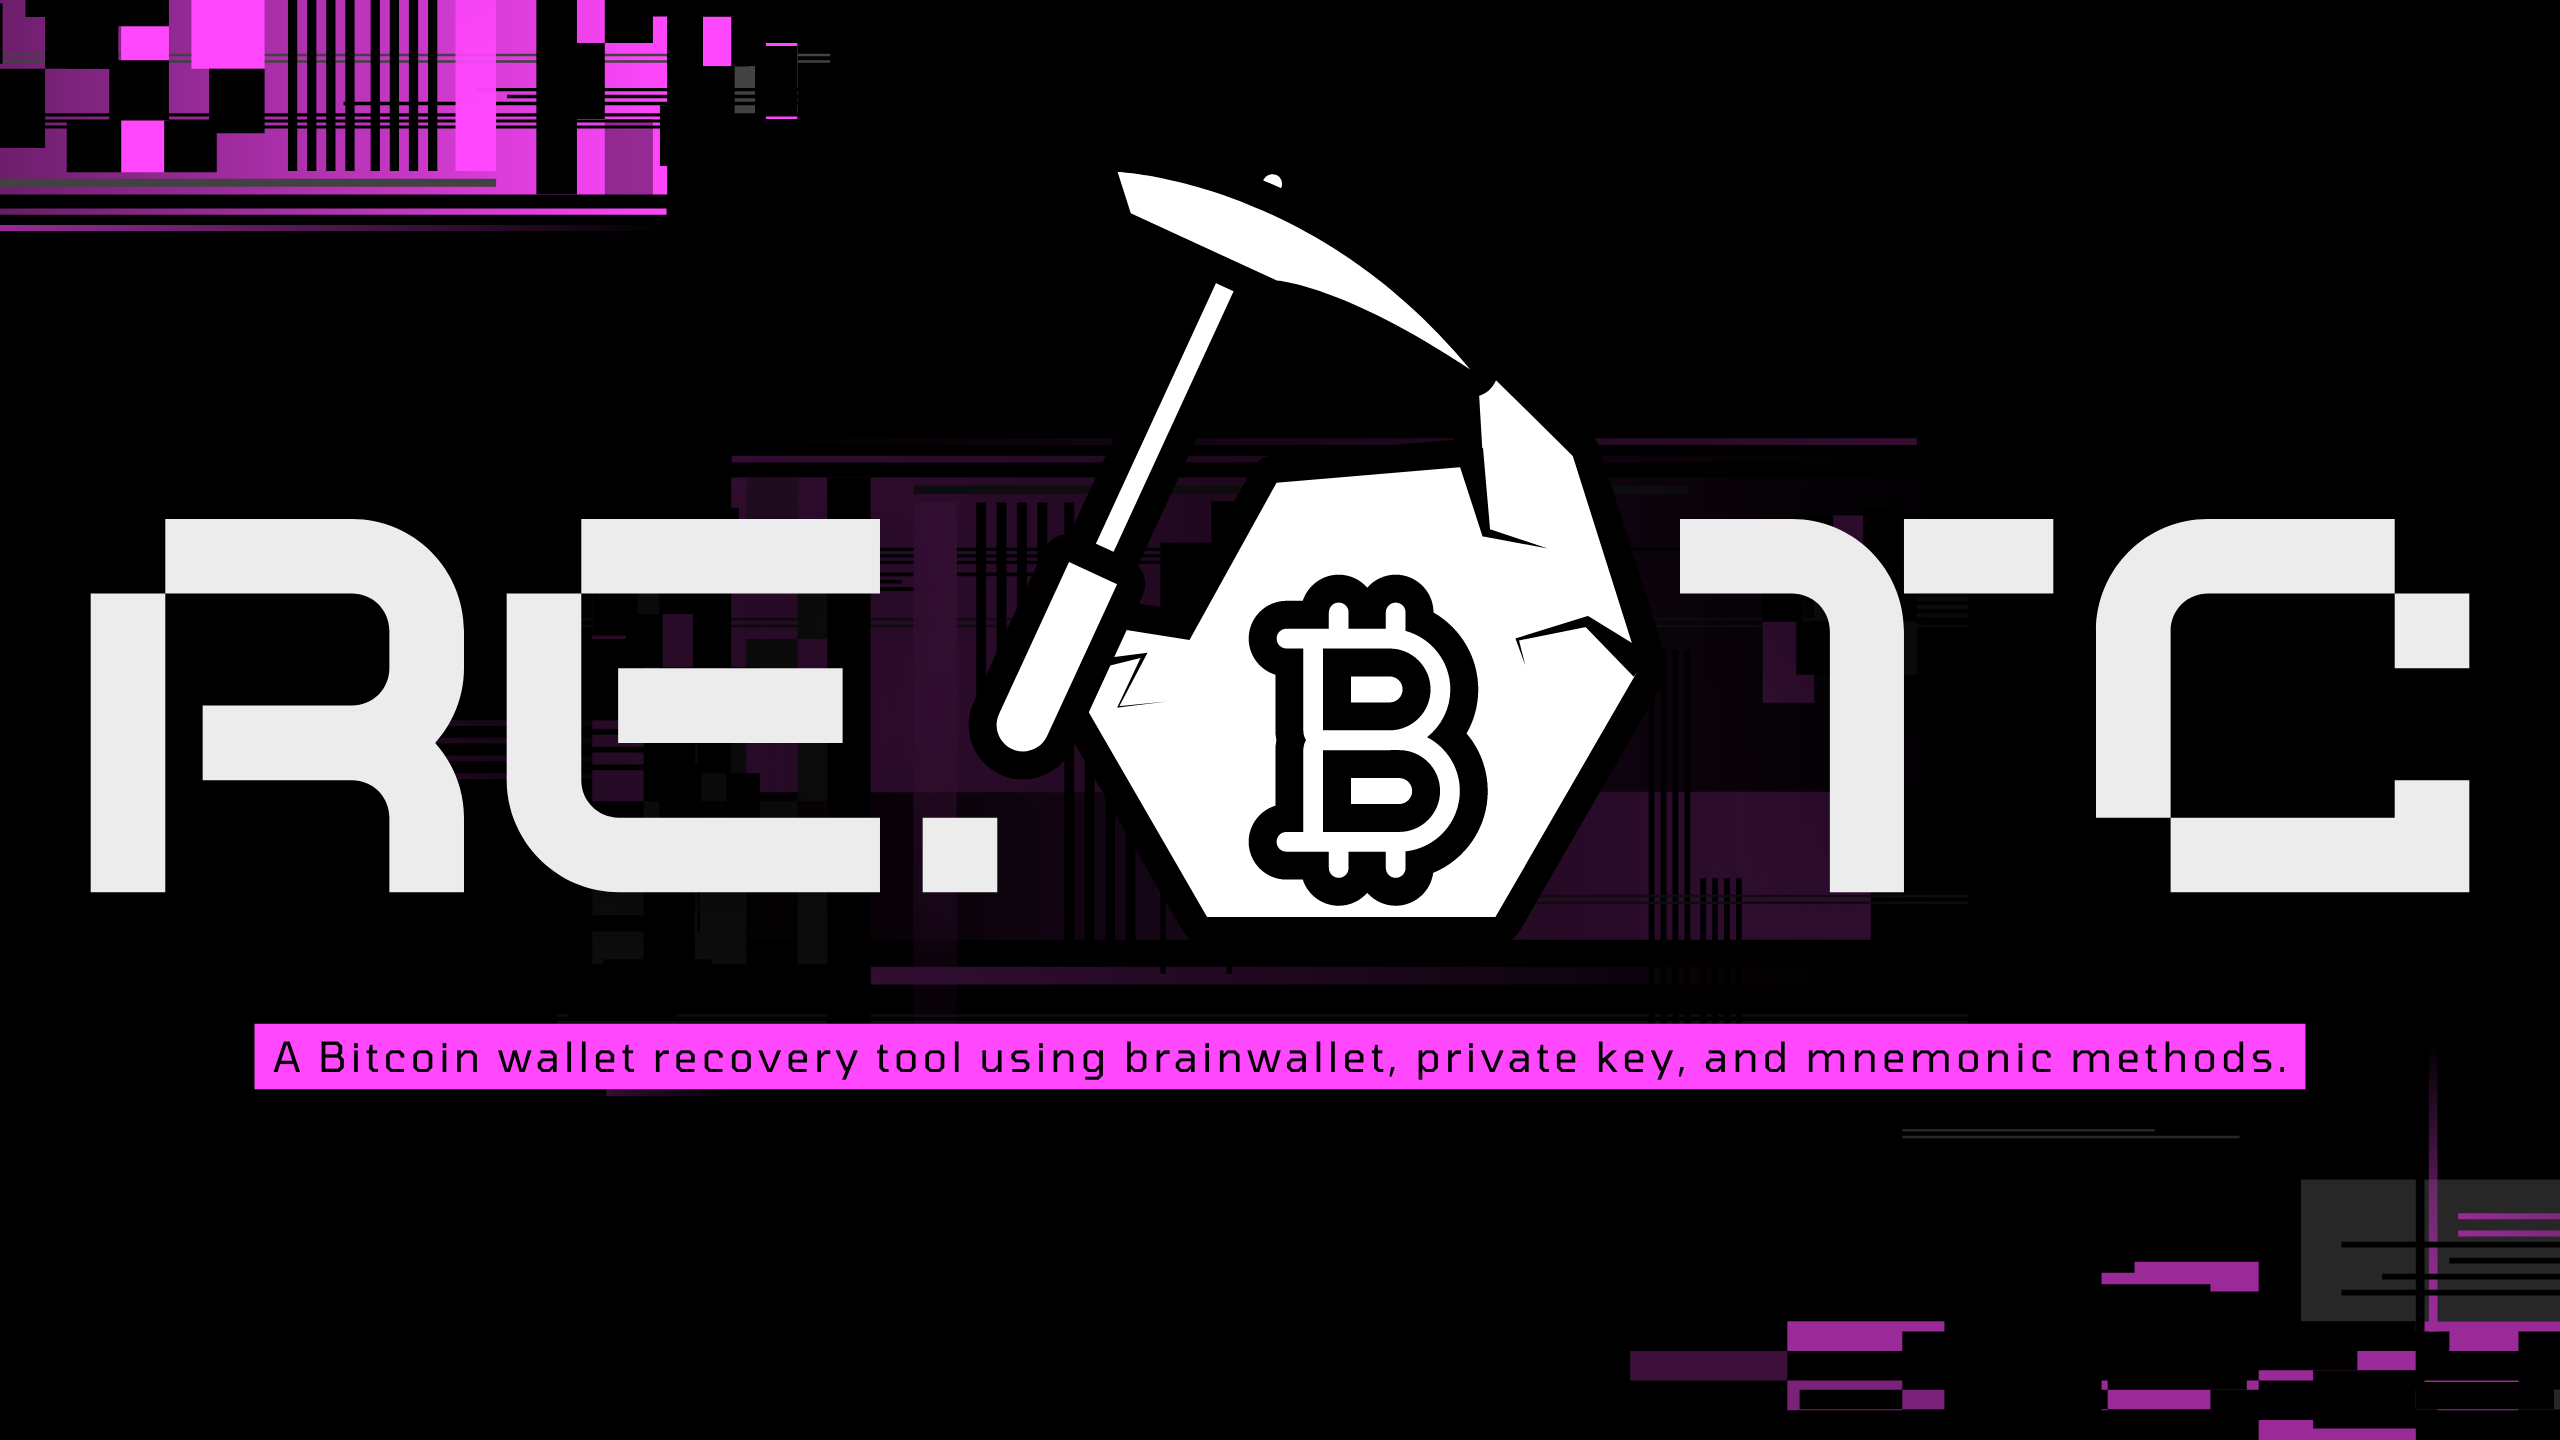 All Bitcoin private keys are on this website | Hacker News